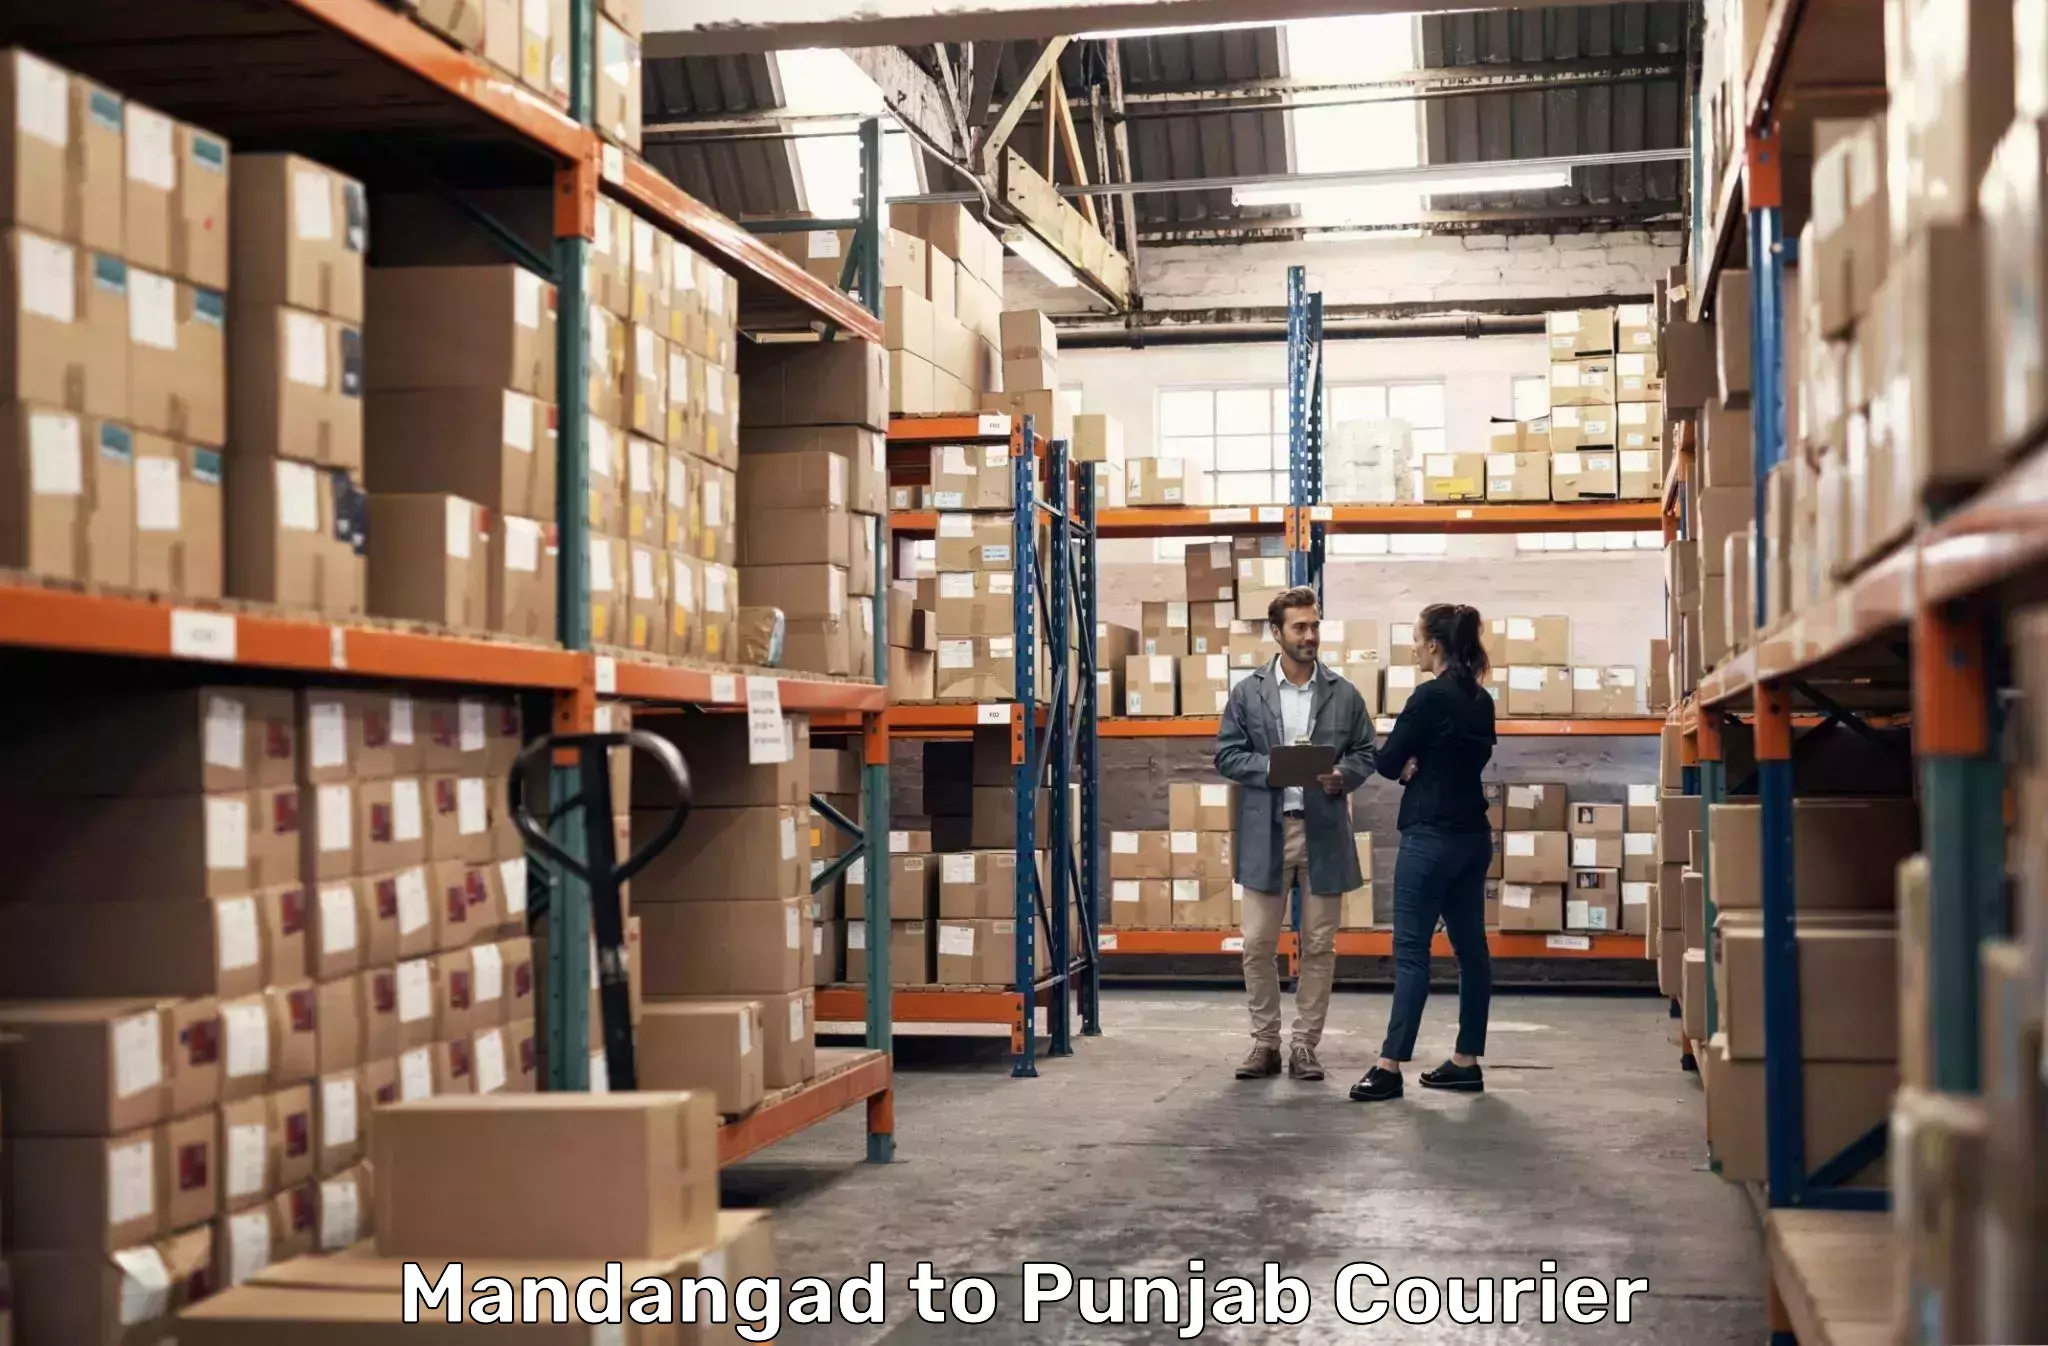 Residential courier service Mandangad to Amritsar